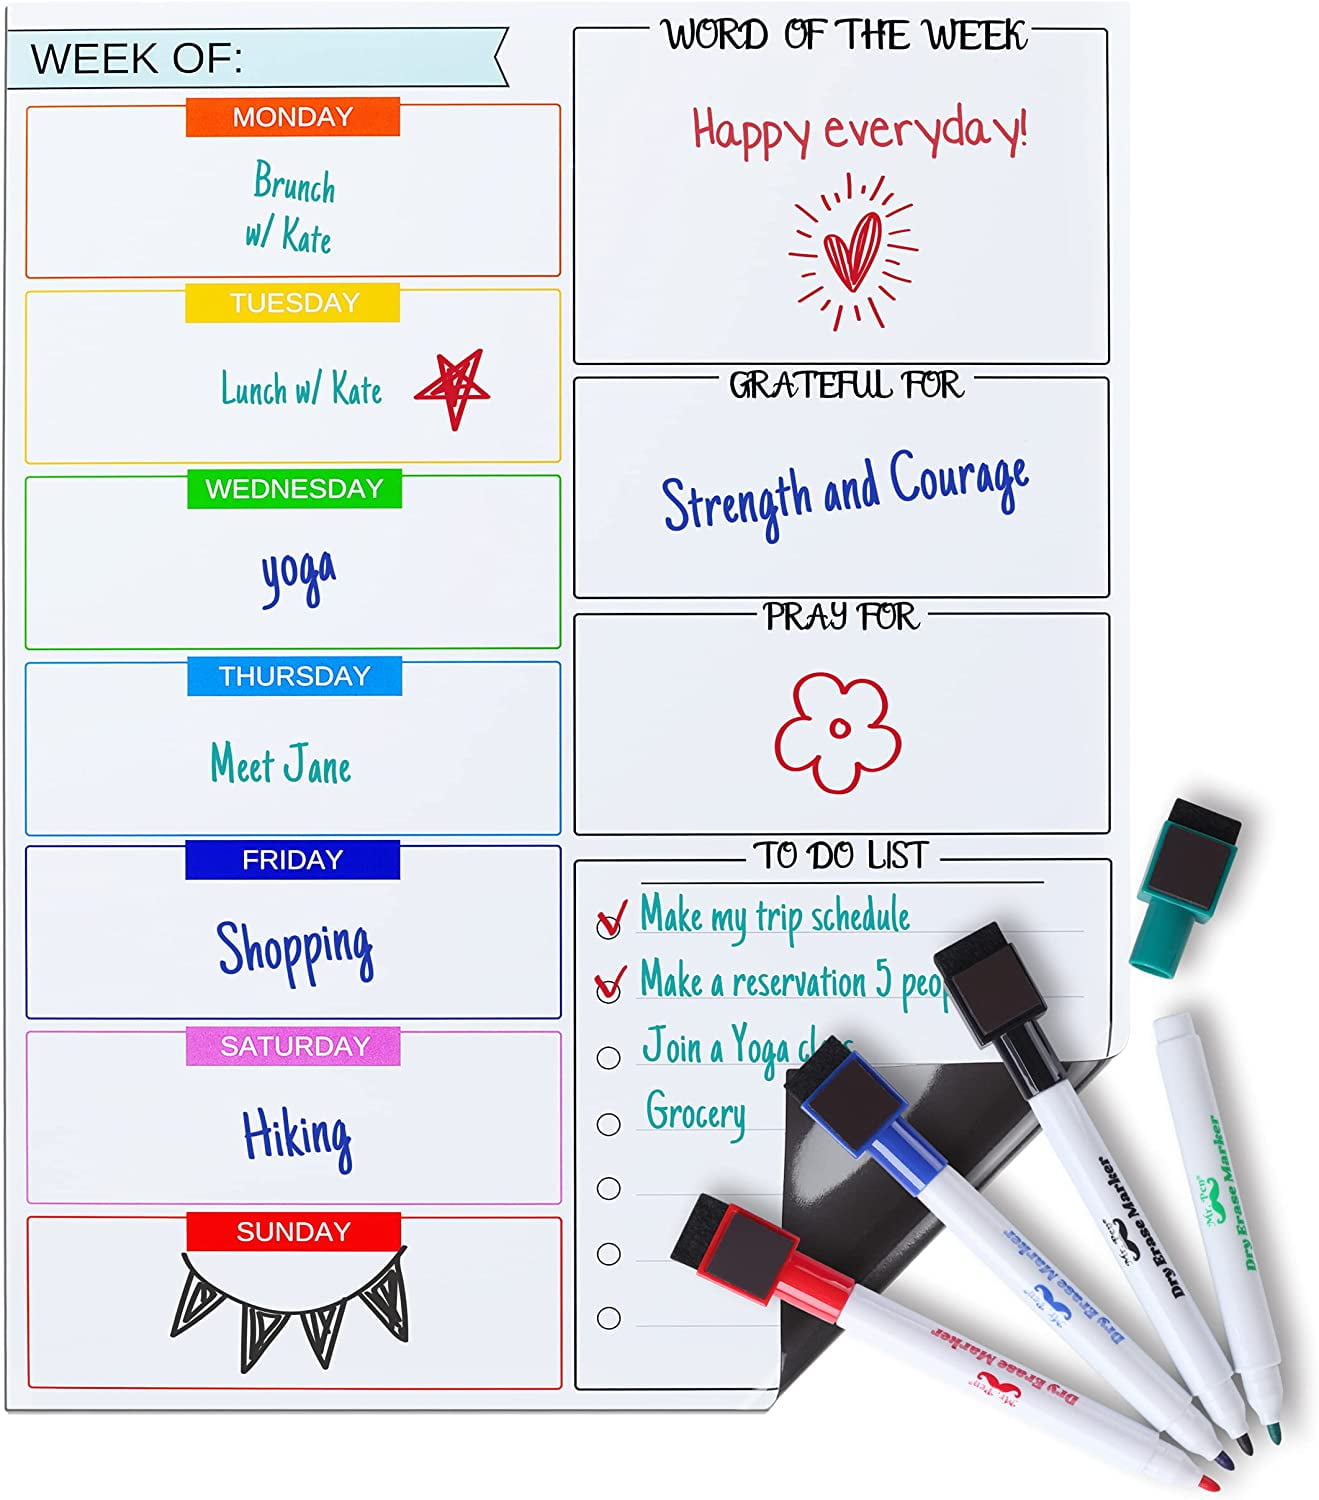 Magnetic Refrigerator White Board Planner for organizing activities Dry Erase White Board Fridge Calendar by My Tidy Family Whiteboard planner calendar with magnetic back for daily organization